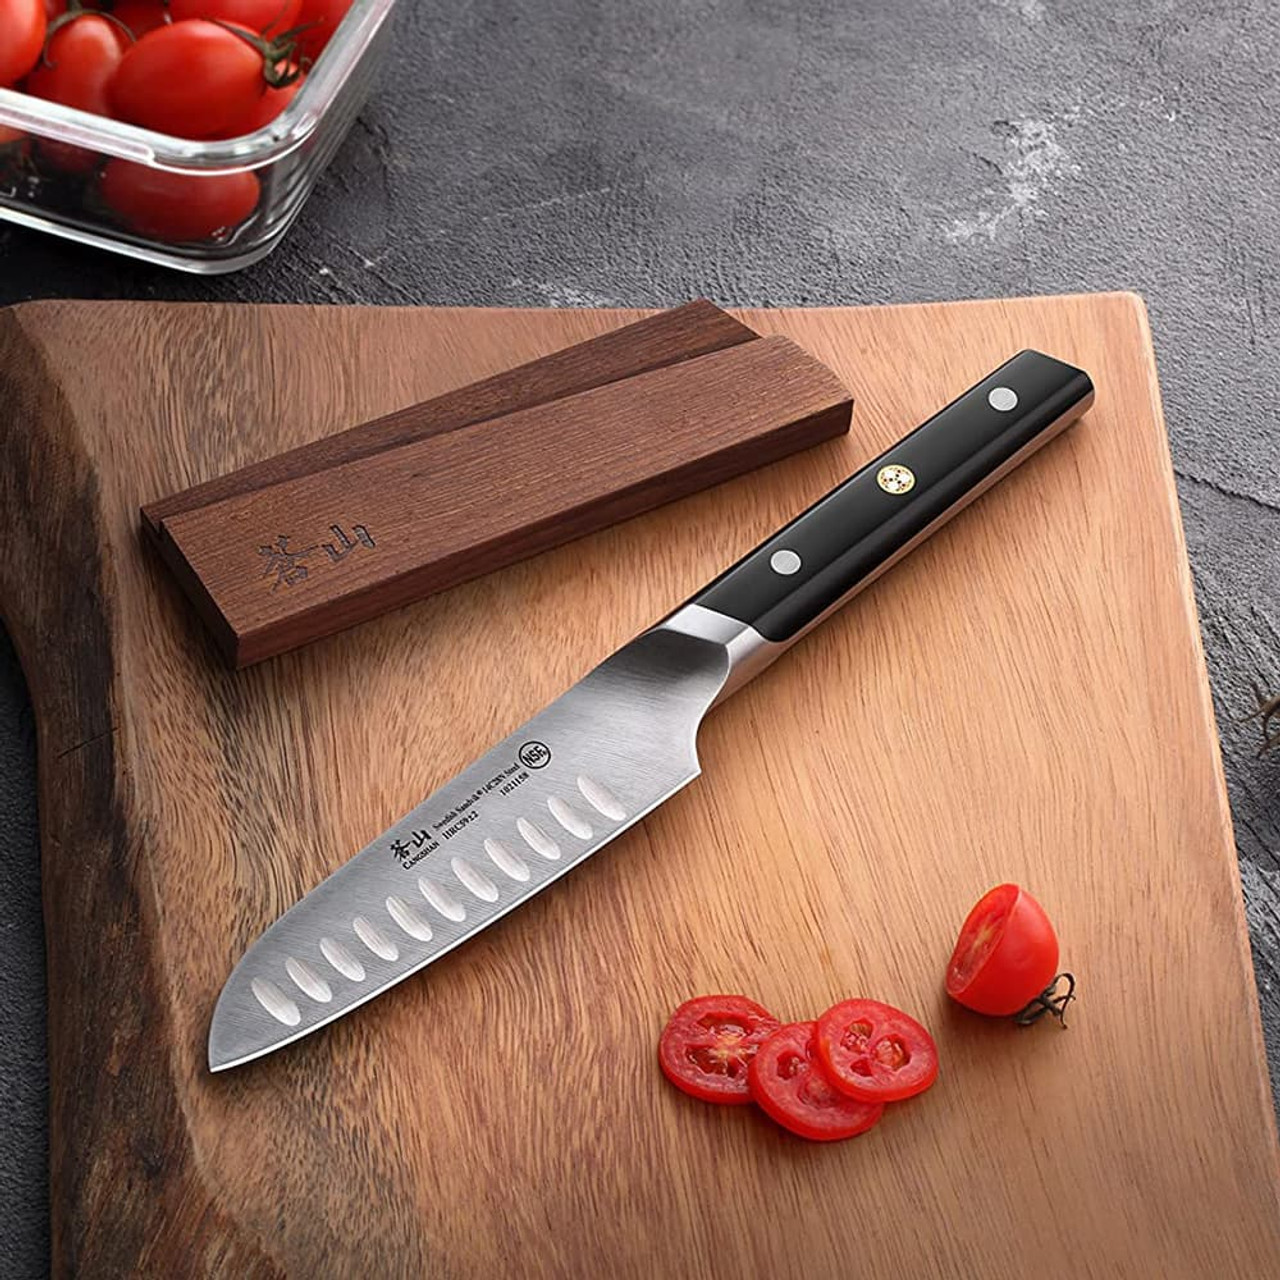 https://cdn11.bigcommerce.com/s-hccytny0od/images/stencil/1280x1280/products/4104/15321/cangshan-tc-series-santoku-knife-5in-2__78000.1624772477.jpg?c=2?imbypass=on